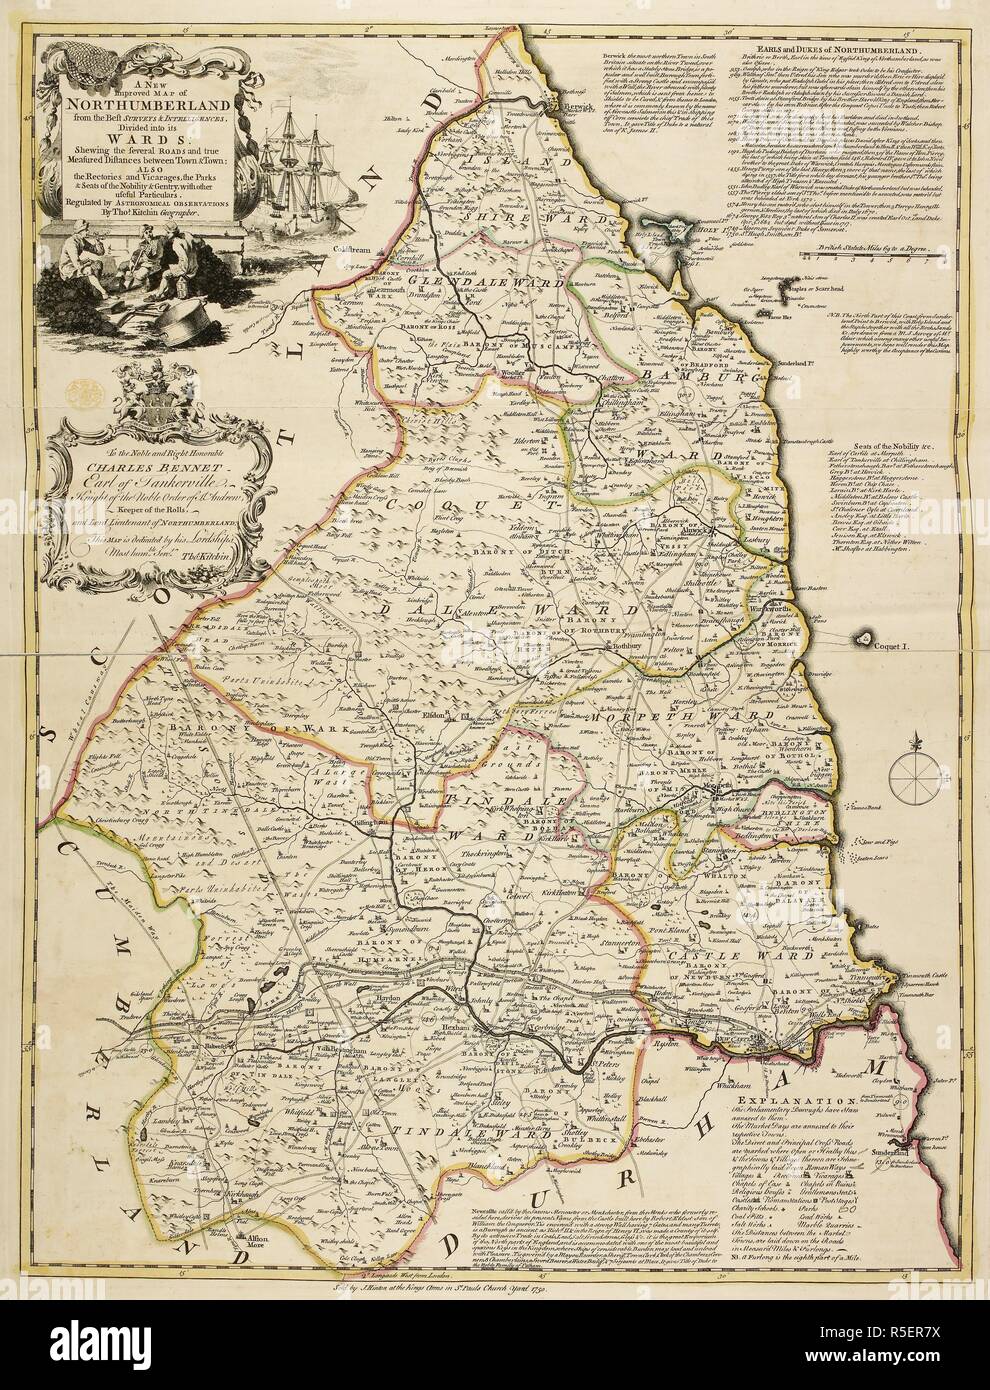 A map of Northumberland. A new and improved Map of Northumberland. London, 1750. Source: Maps K.Top.32.41. Language: English. Author: THOMAS KITCHIN. Stock Photo